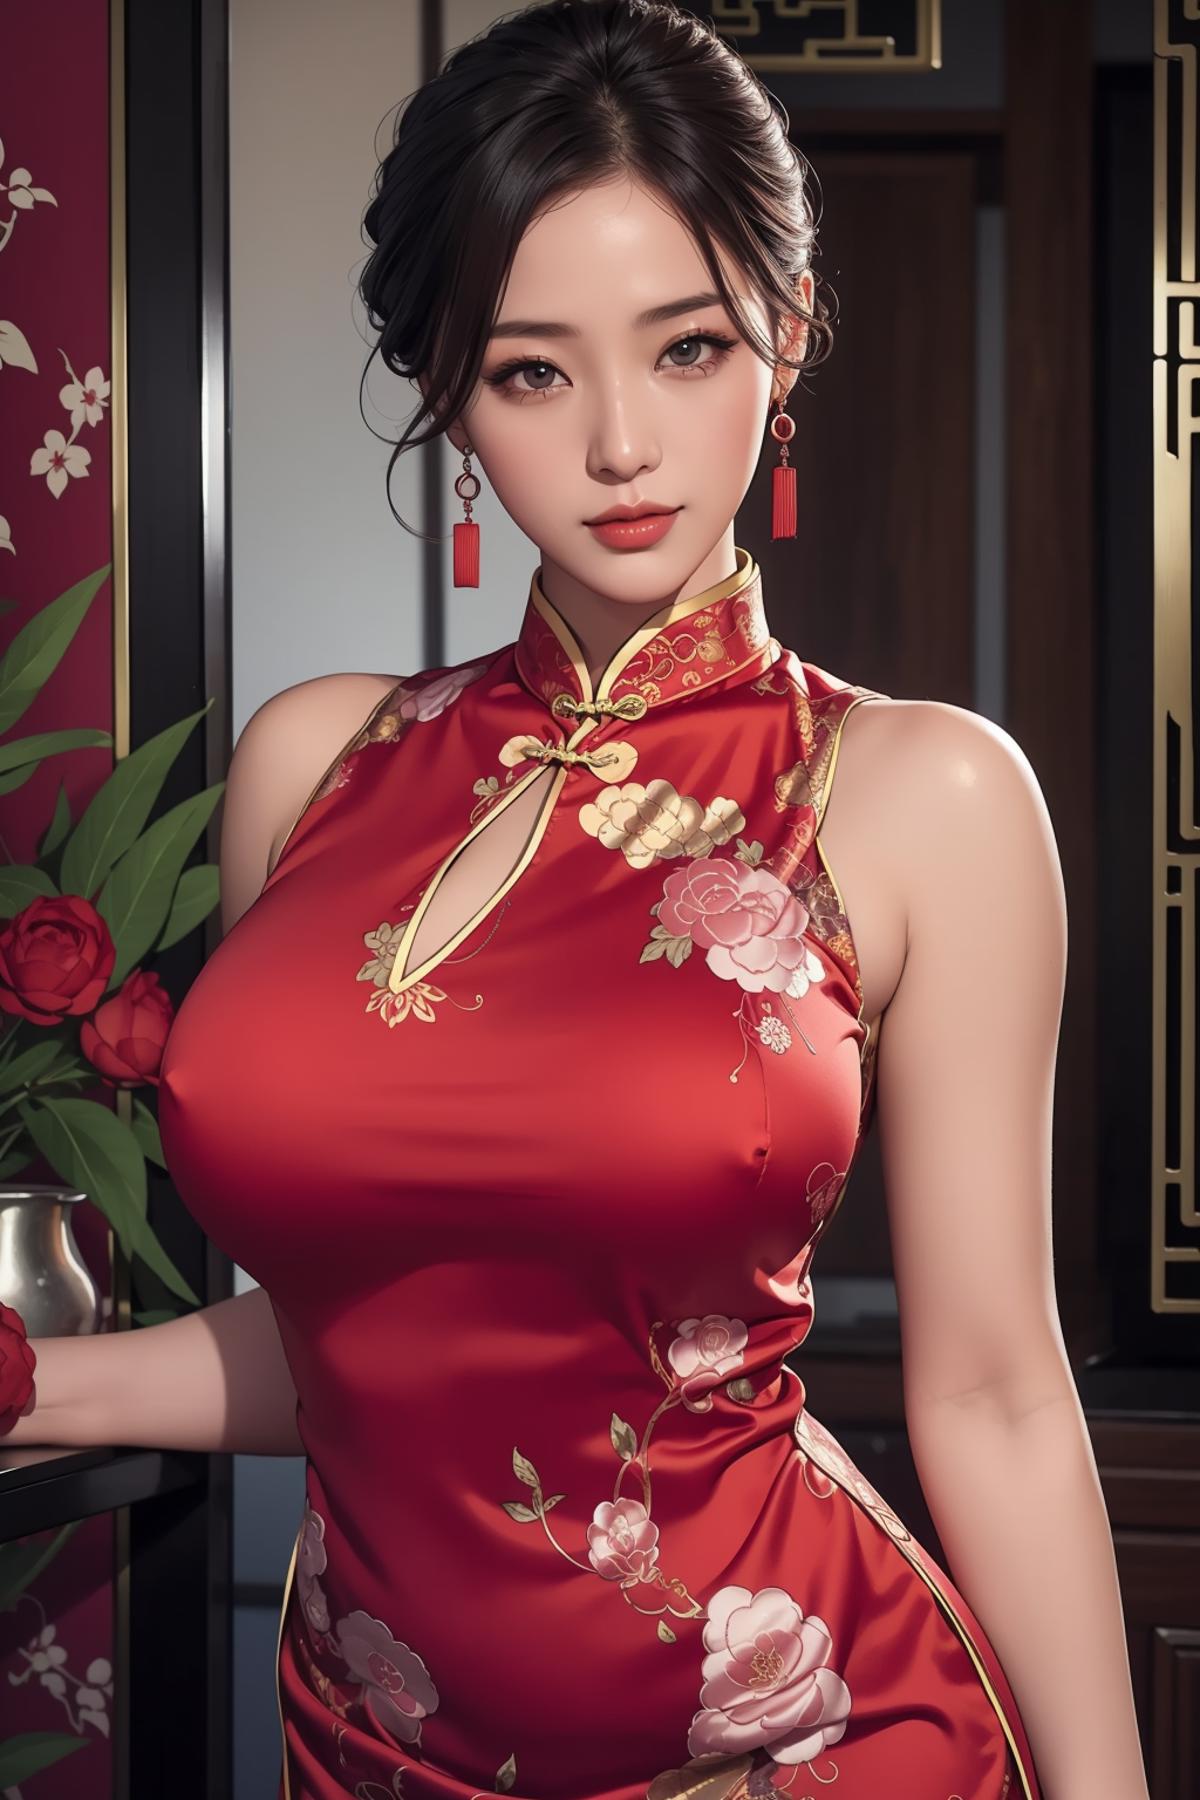 A beautiful Asian woman wearing a red traditional Chinese dress, complete with a phoenix design.